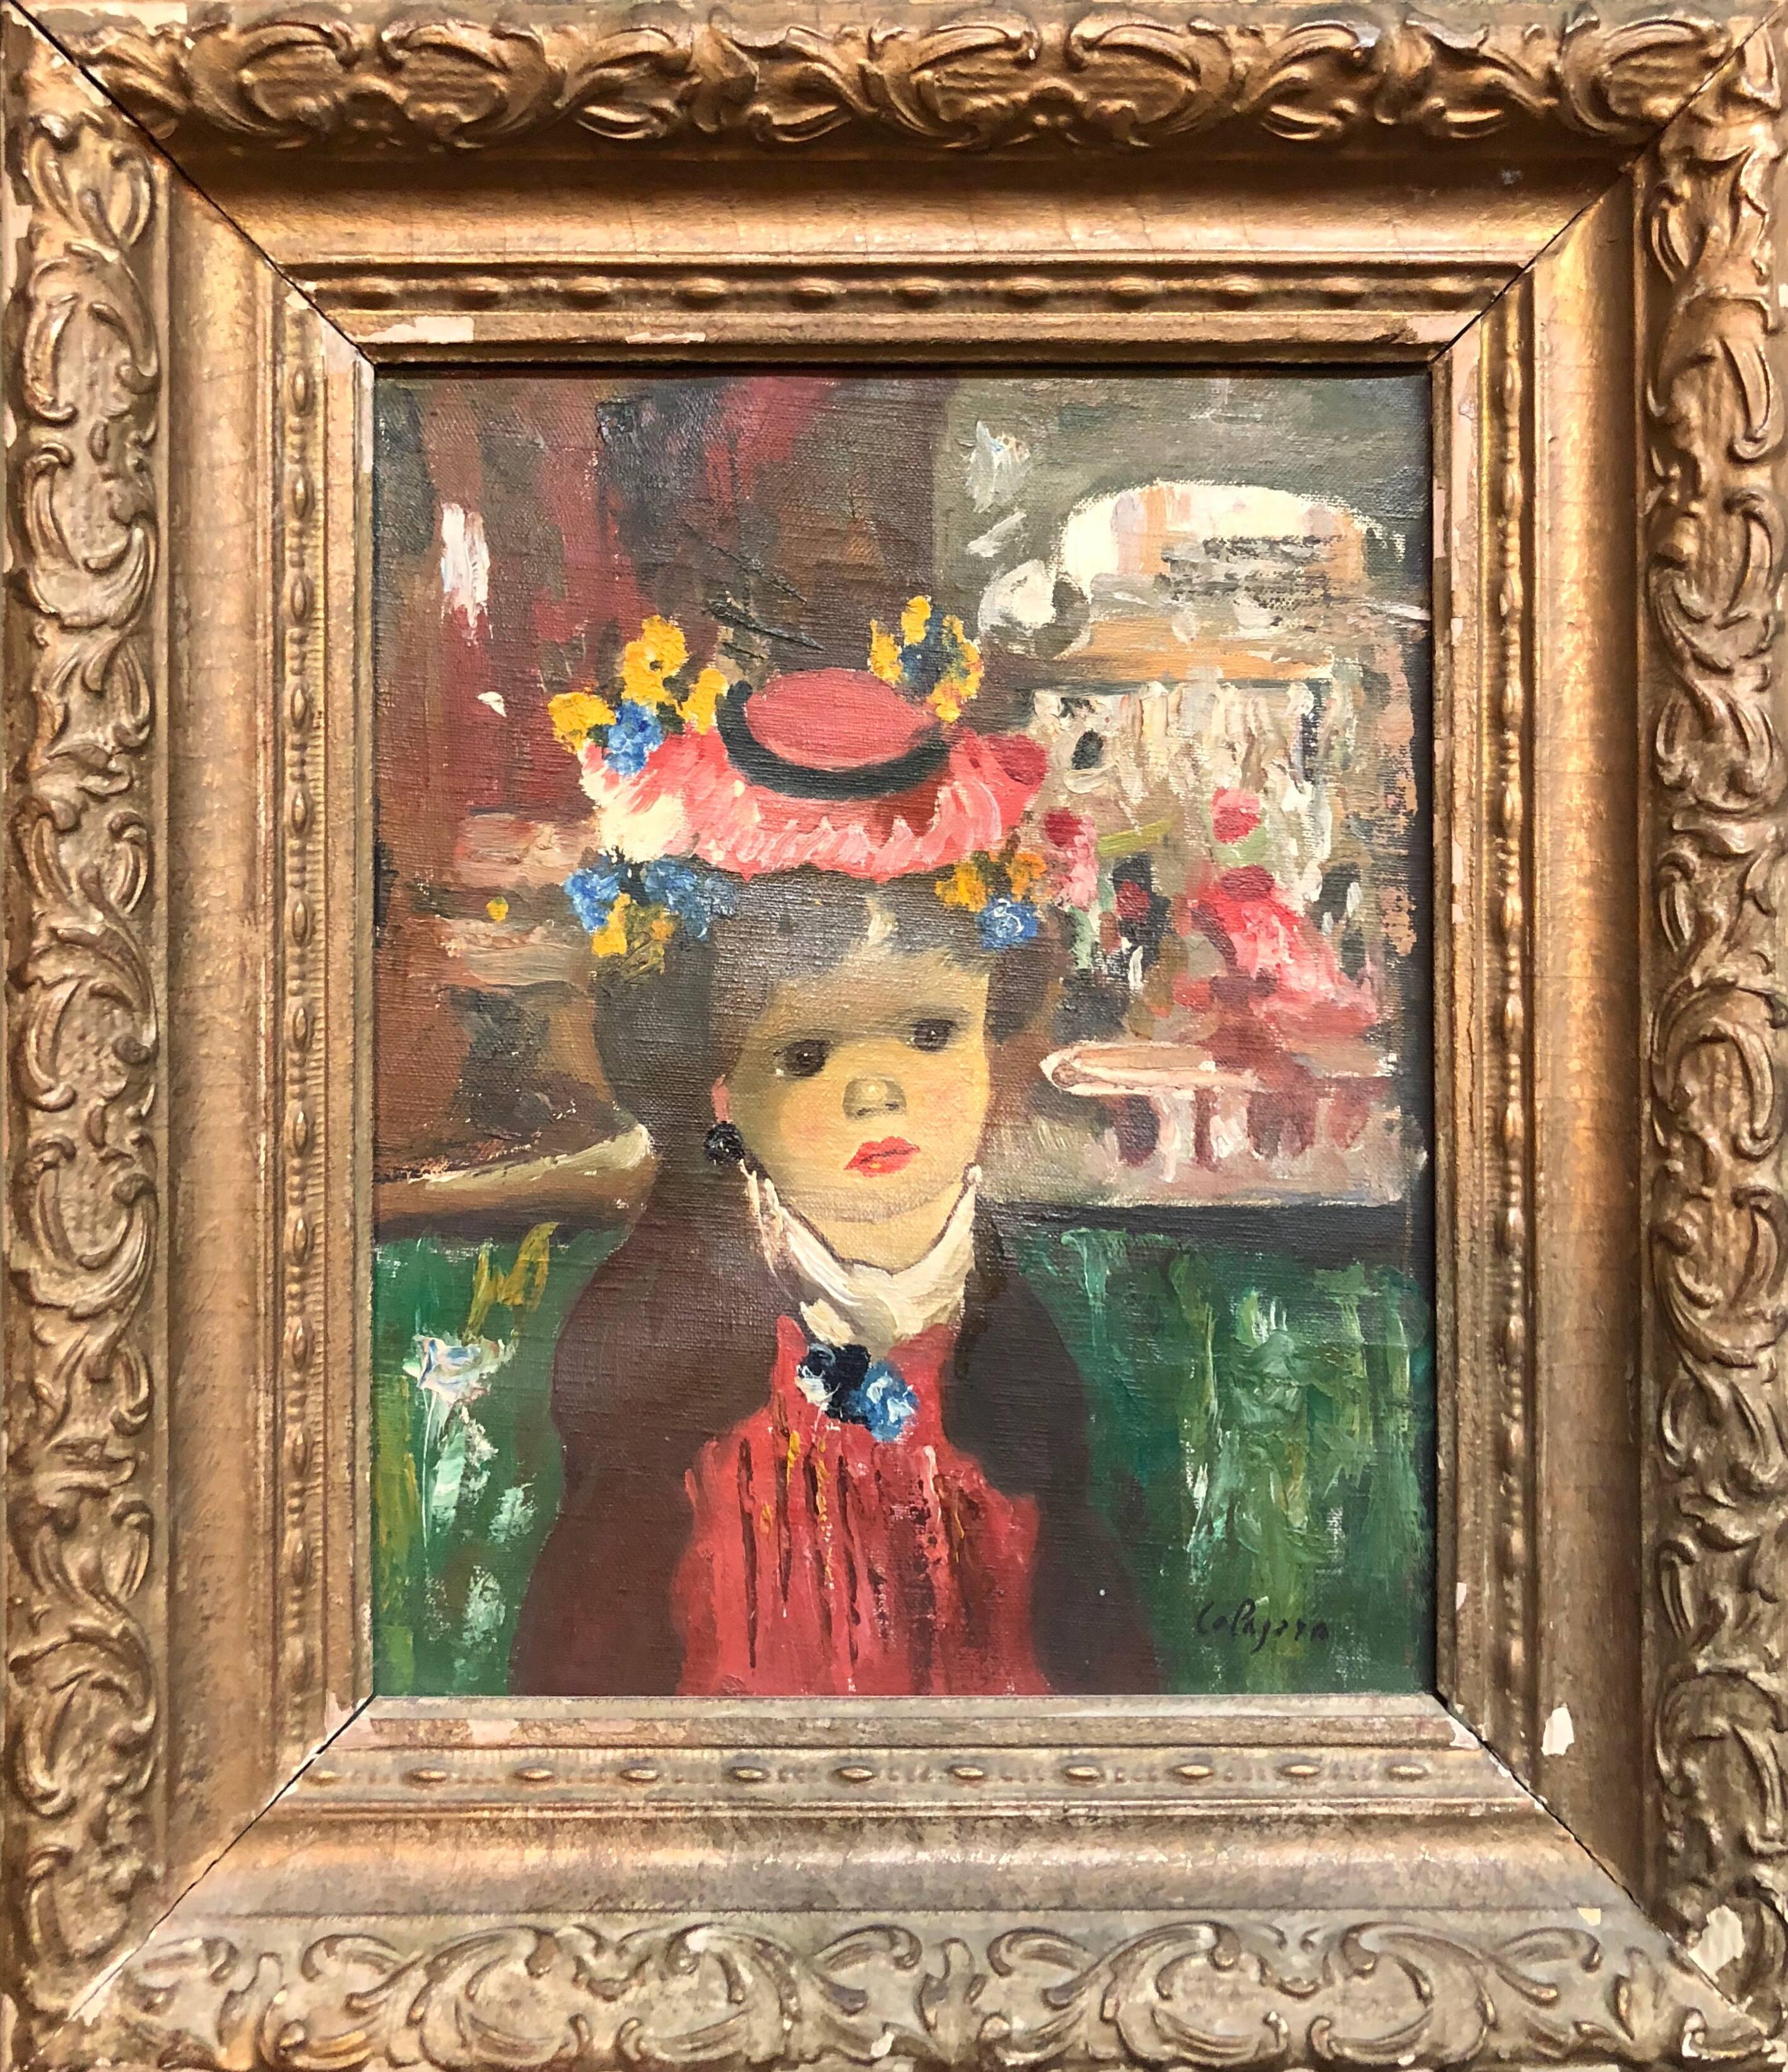 Jean Calogero - L'Enfant, Colorful Surrealist Child Girl with Bonnet in  Venice For Sale at 1stDibs